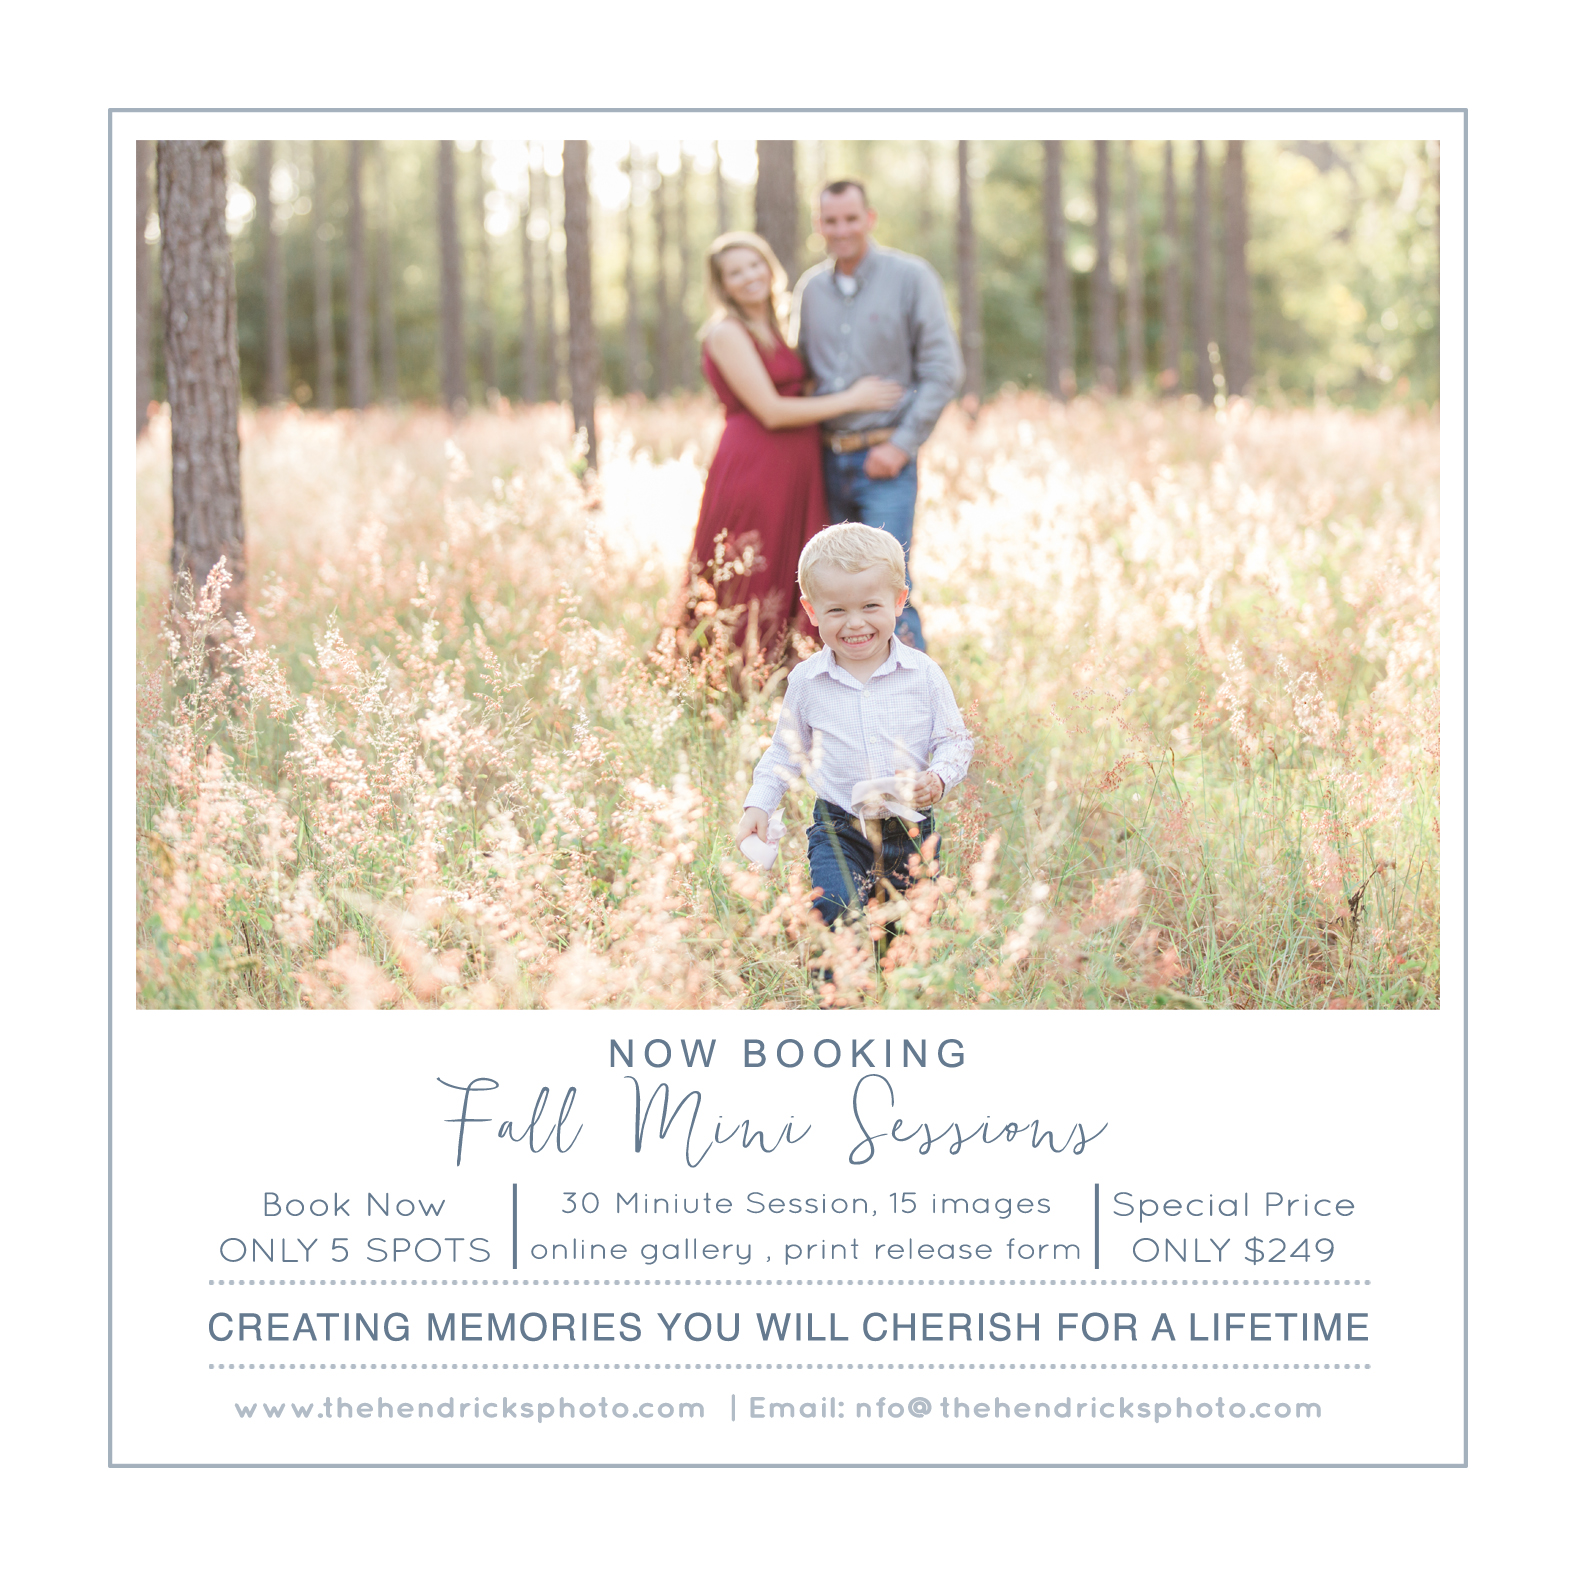 Fall Mini Sessions Open for Booking